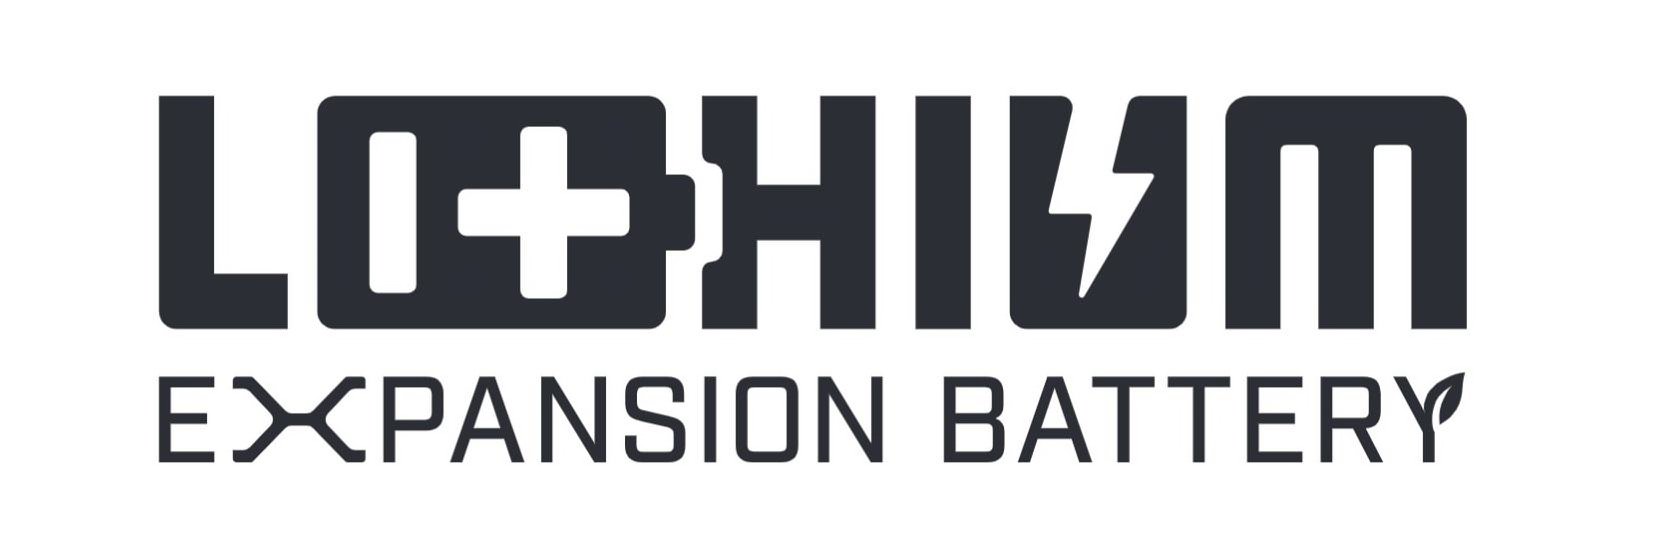  LITHIUM EXPANSION BATTERY